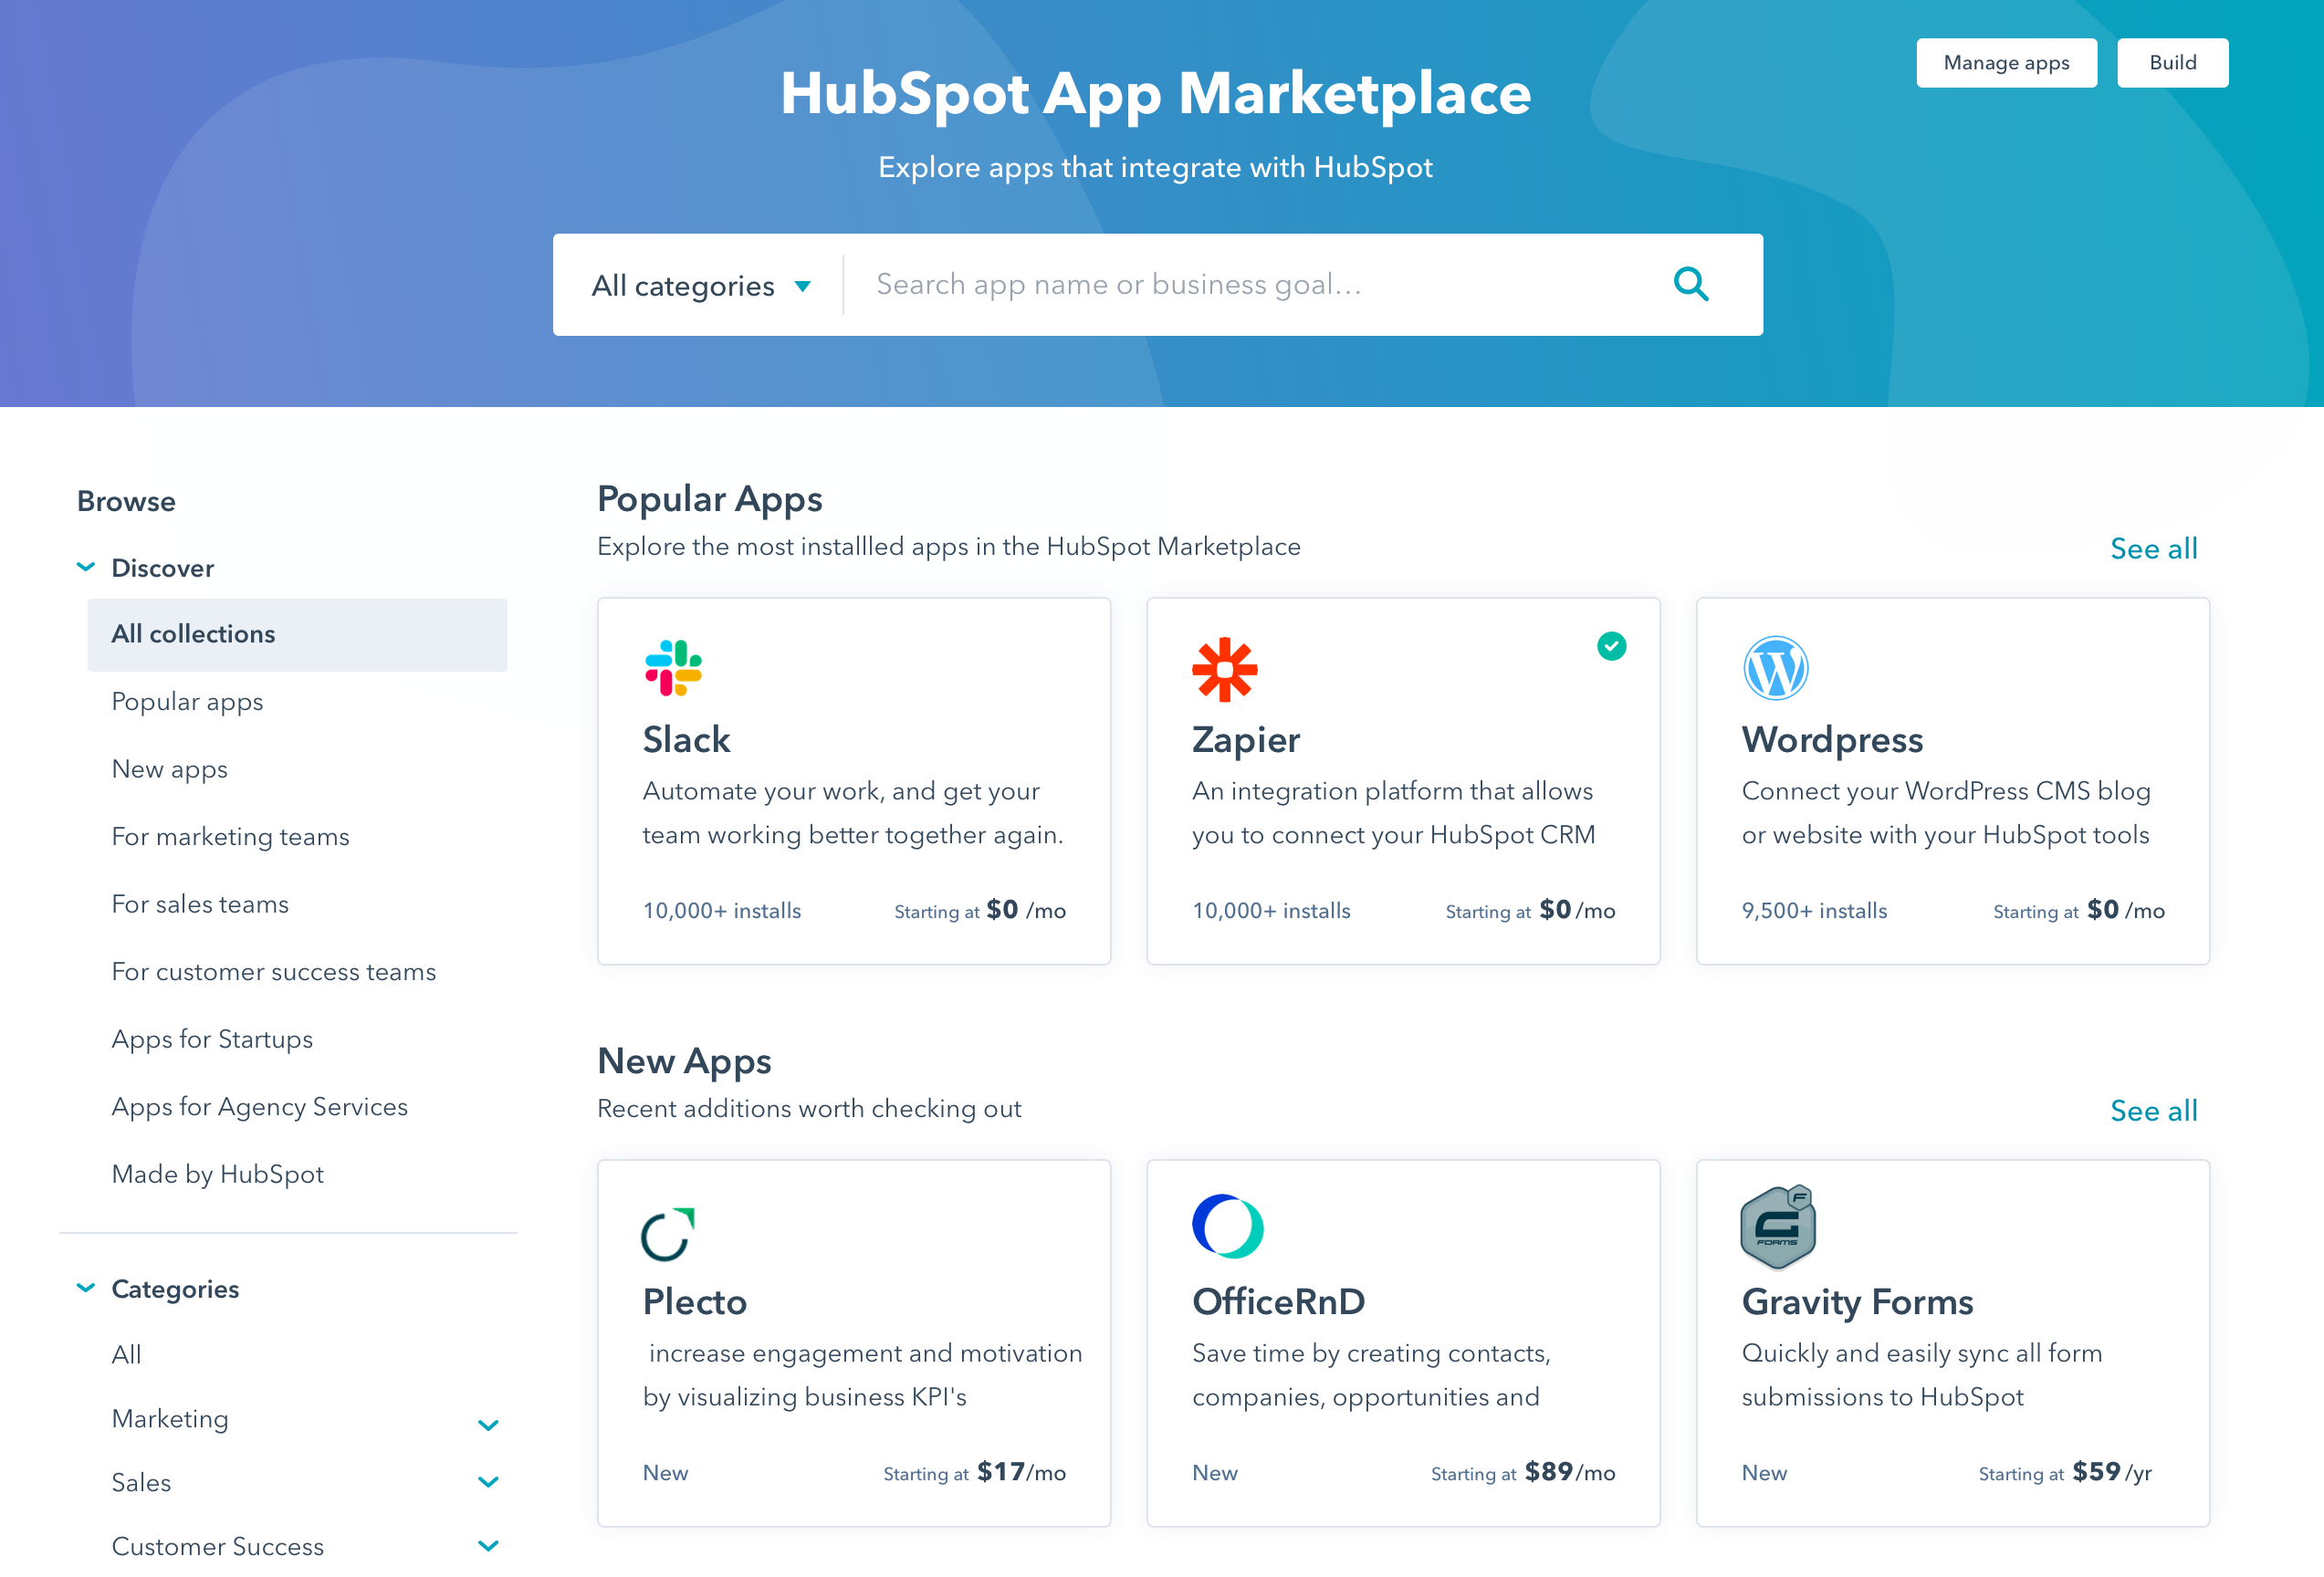 HubSpot Launches Redesigned App Marketplace to Make It Easier for Growing Businesses to Find and Connect with More Than 300 Integrations